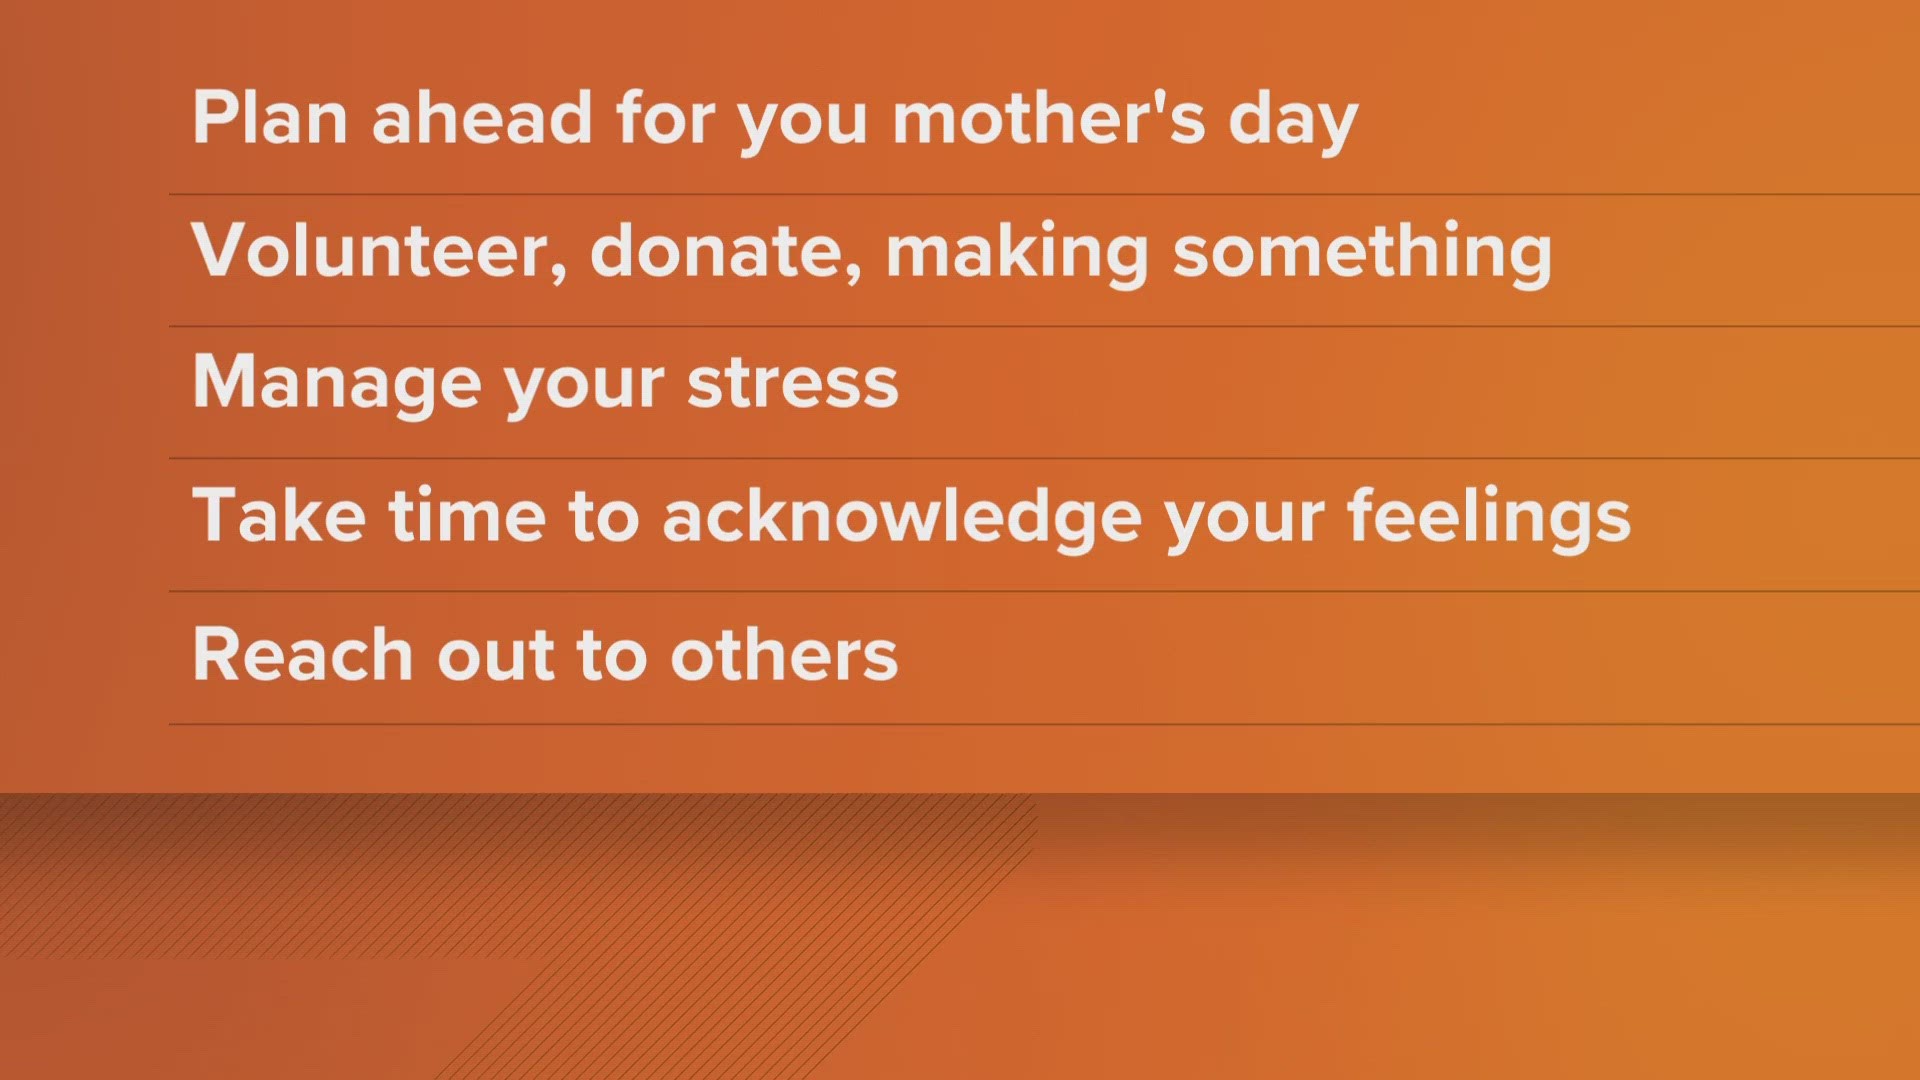 Dr. Sheryl Ziegler talks about how to cope with the loss of a mother or a child on Mother's Day.